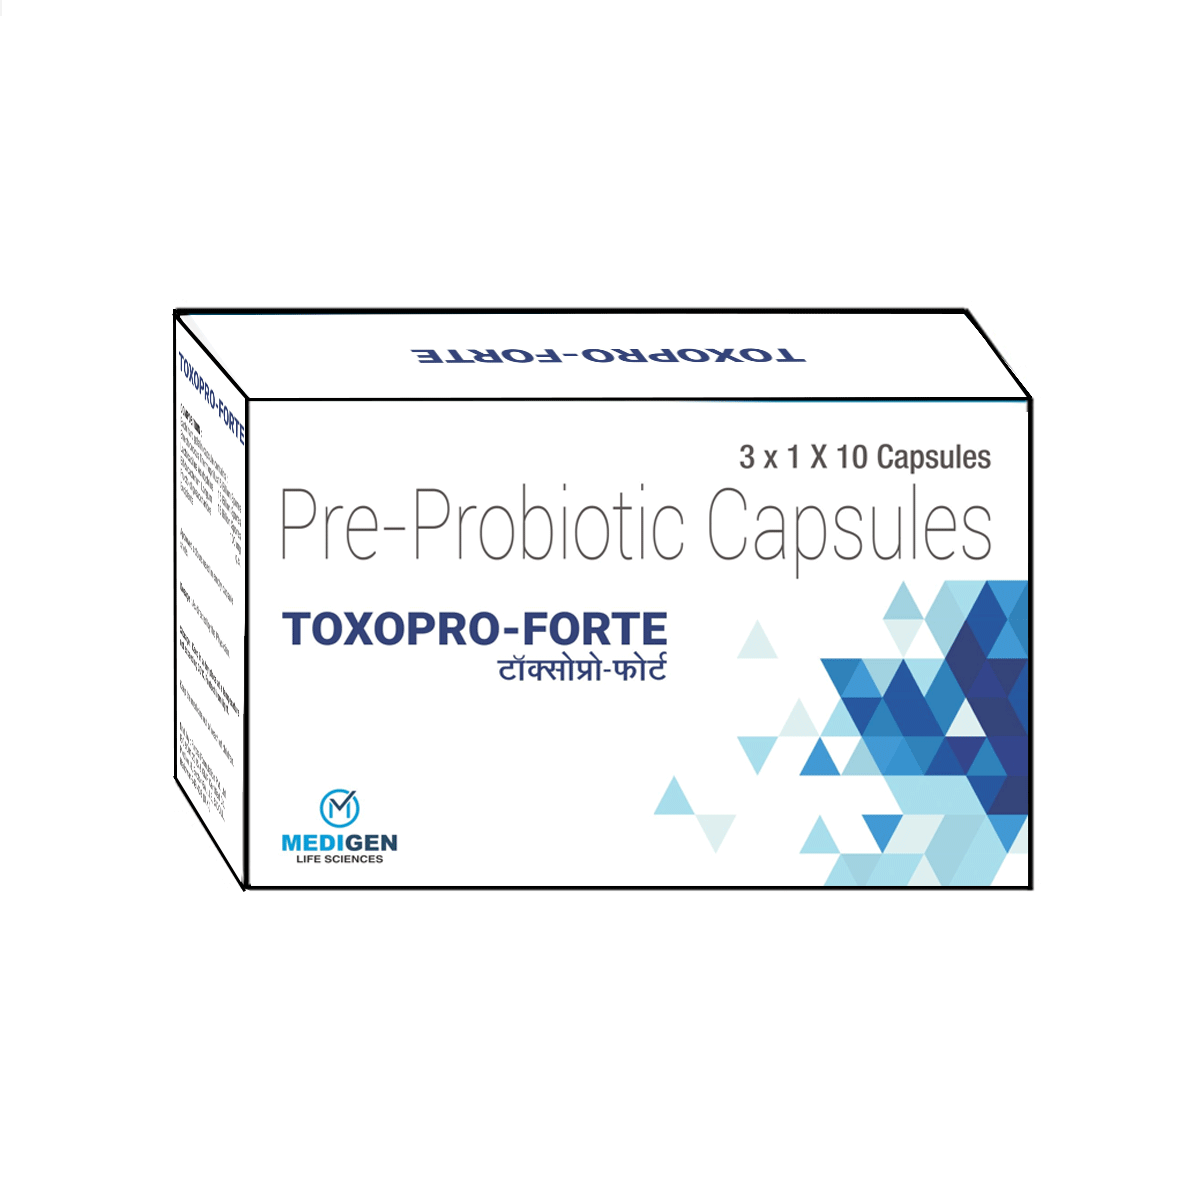 Toxopro-Forte